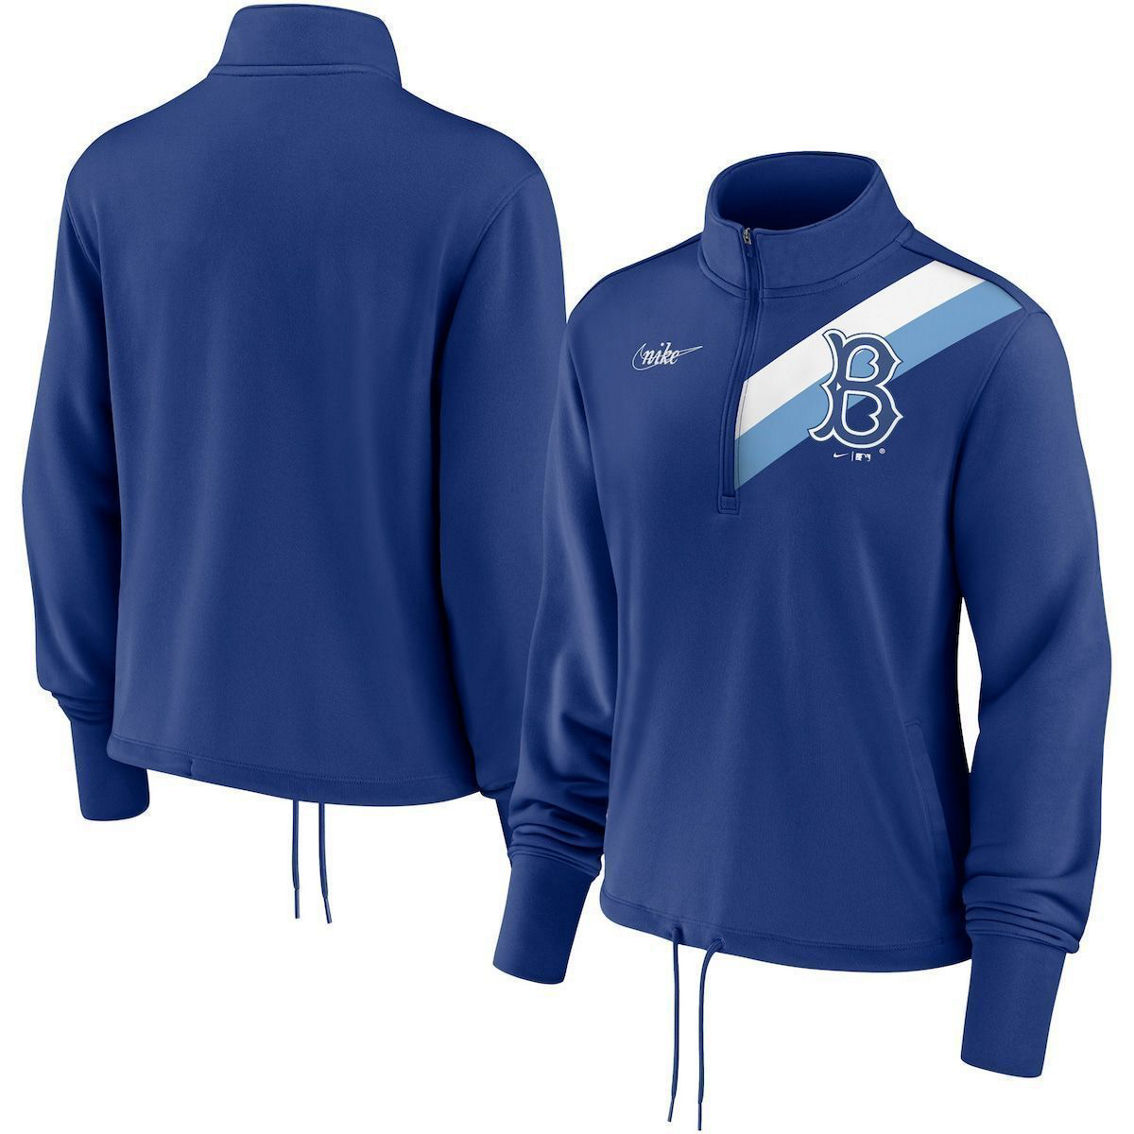 Nike Women's Royal Brooklyn Dodgers Cooperstown Collection Rewind Stripe Performance Half-Zip Pullover - Image 2 of 4